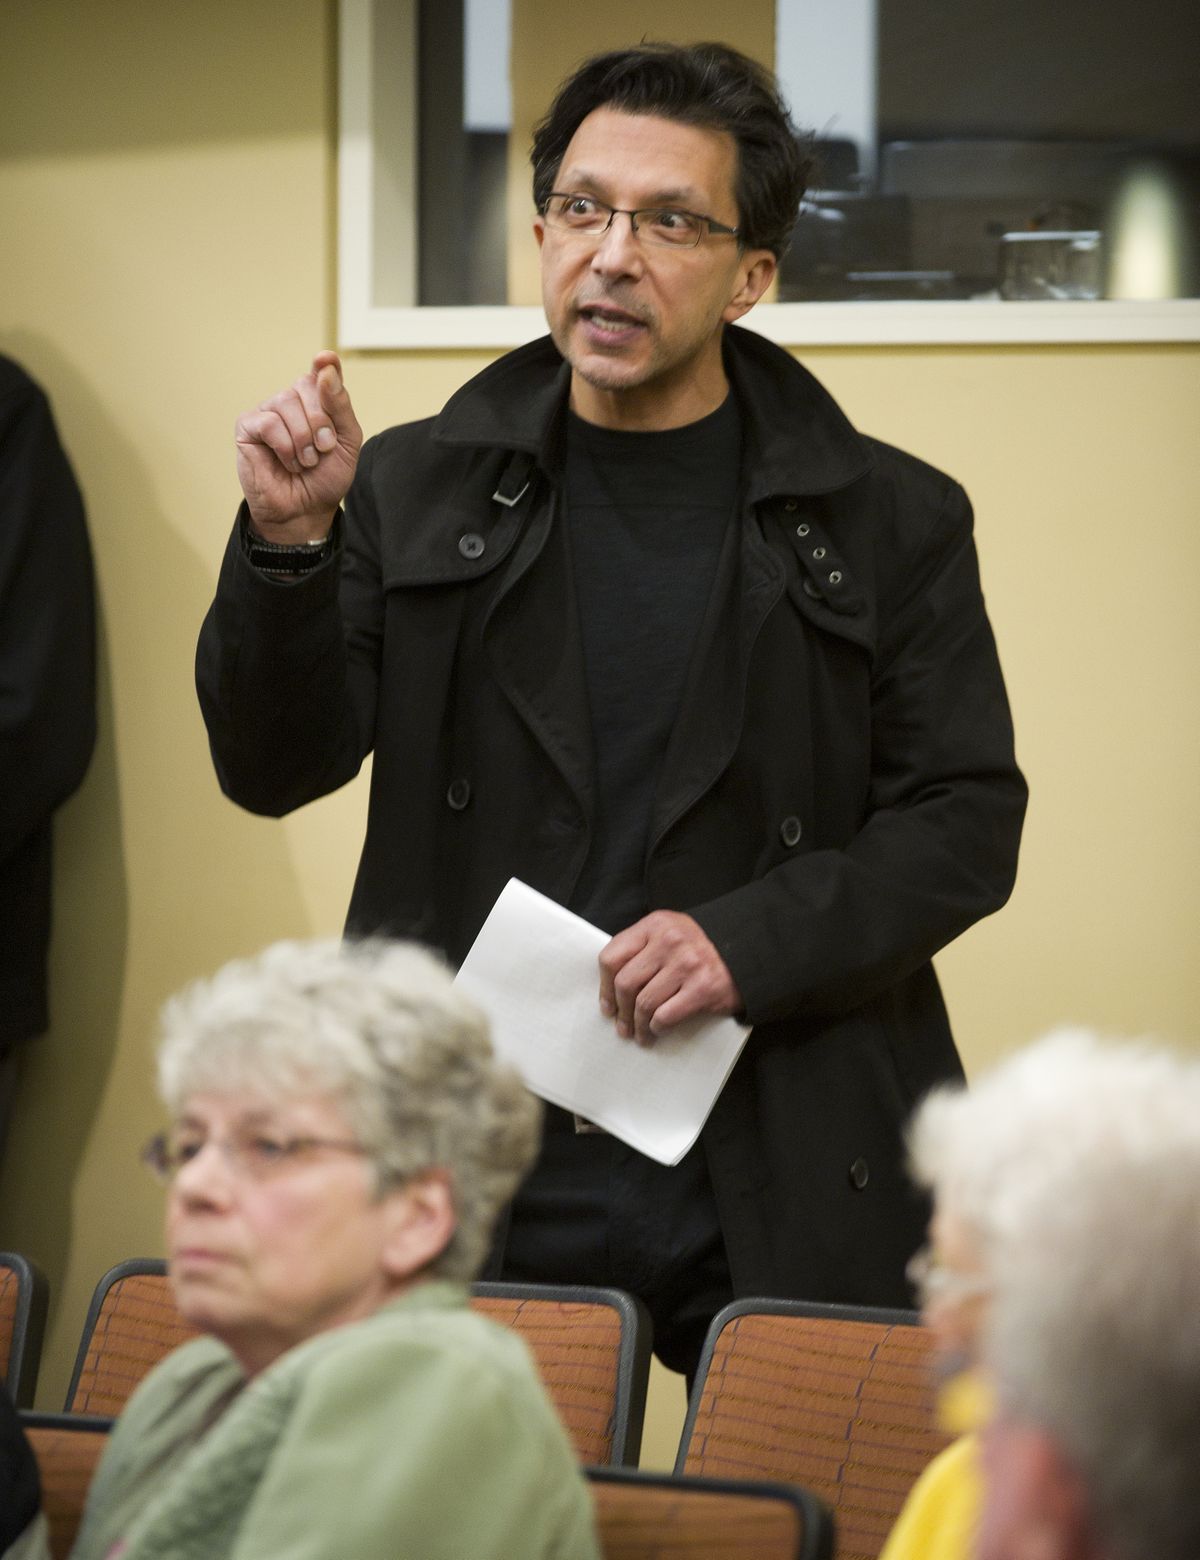 “You have divided the community; we need a new board,” said Nima Motahari during the Northwest Museum of Arts and Culture special board of trustees meeting on Wednesday. Motahari was expressing his displeasure with the firing of MAC Executive Director Forrest Rodgers. (Colin Mulvany)